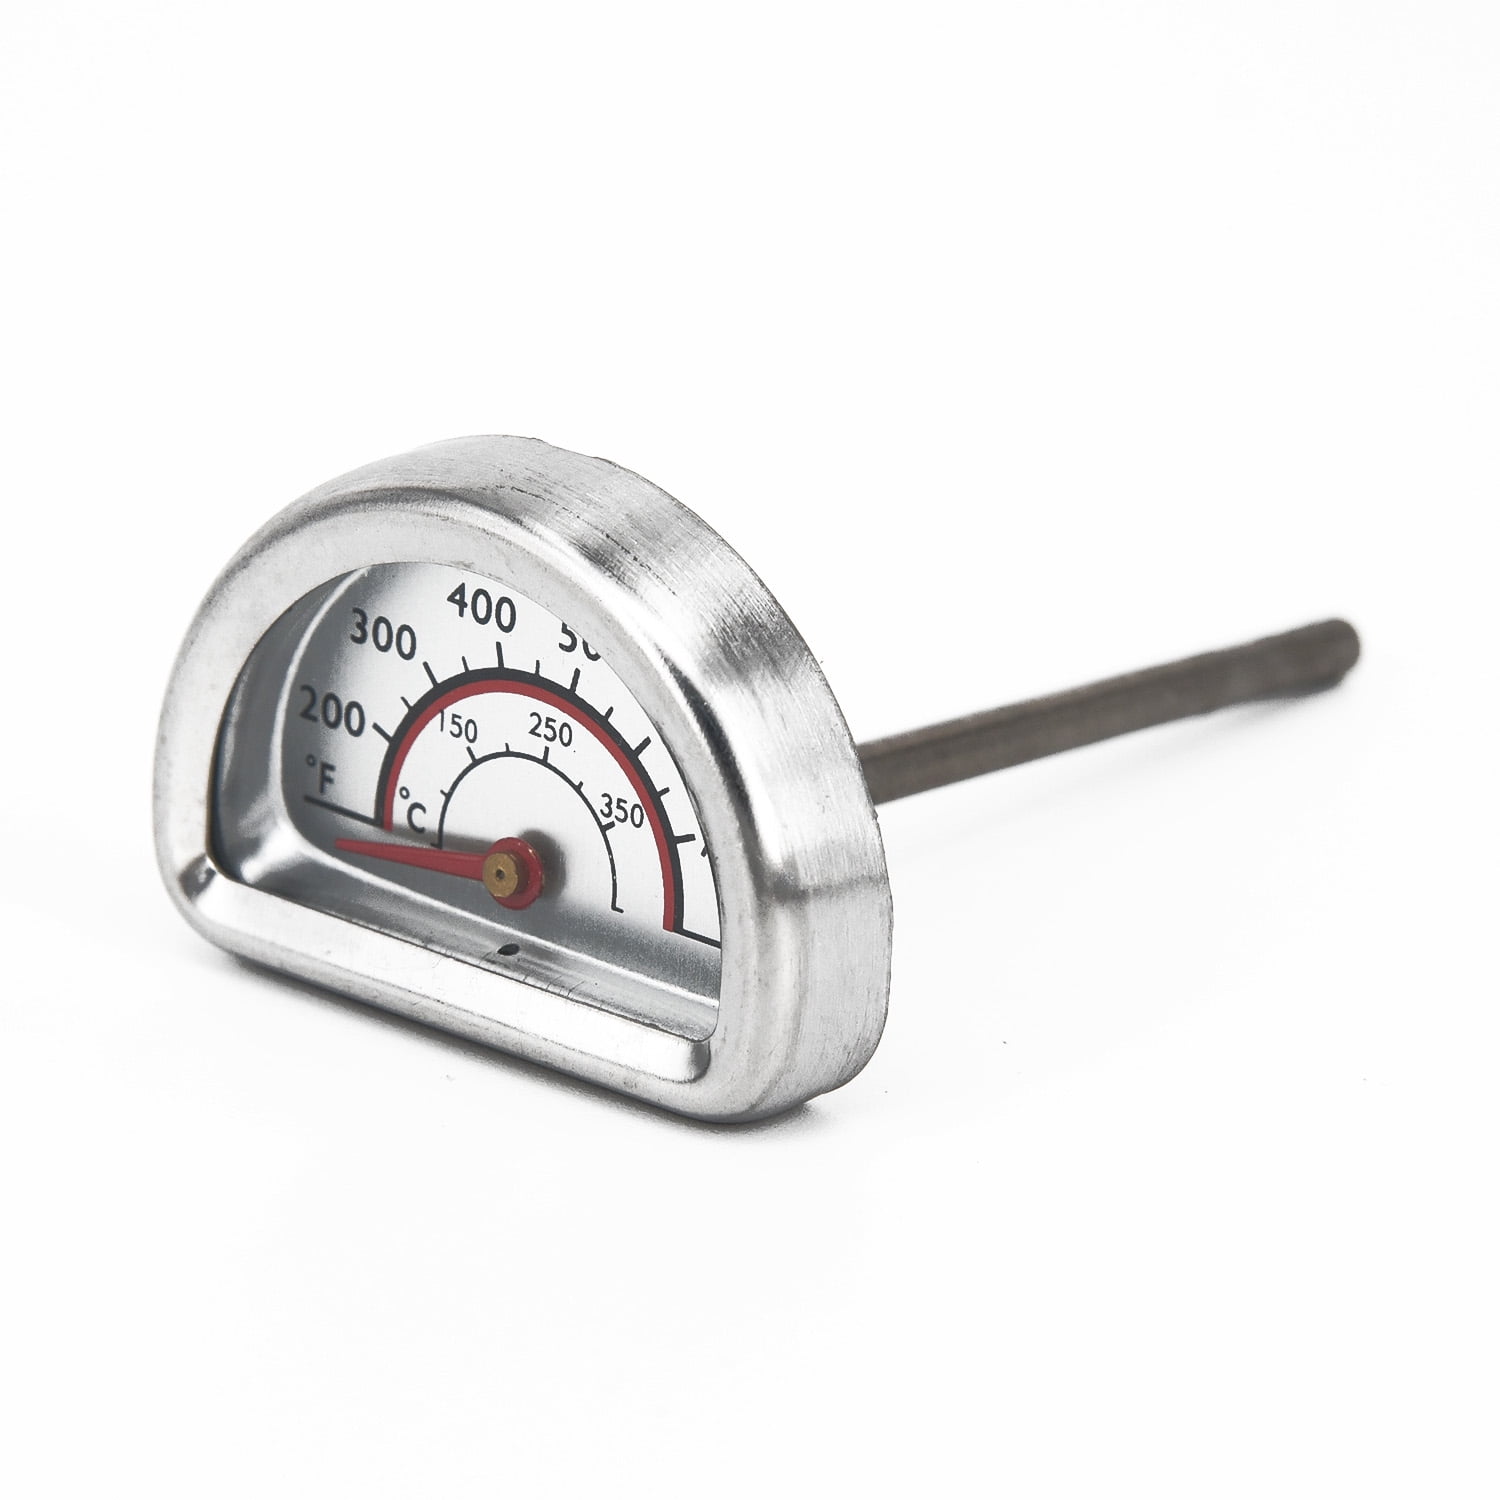 FALYEE Replacement Stainless Heat Indicator For Charbroil Grill Walmart.com